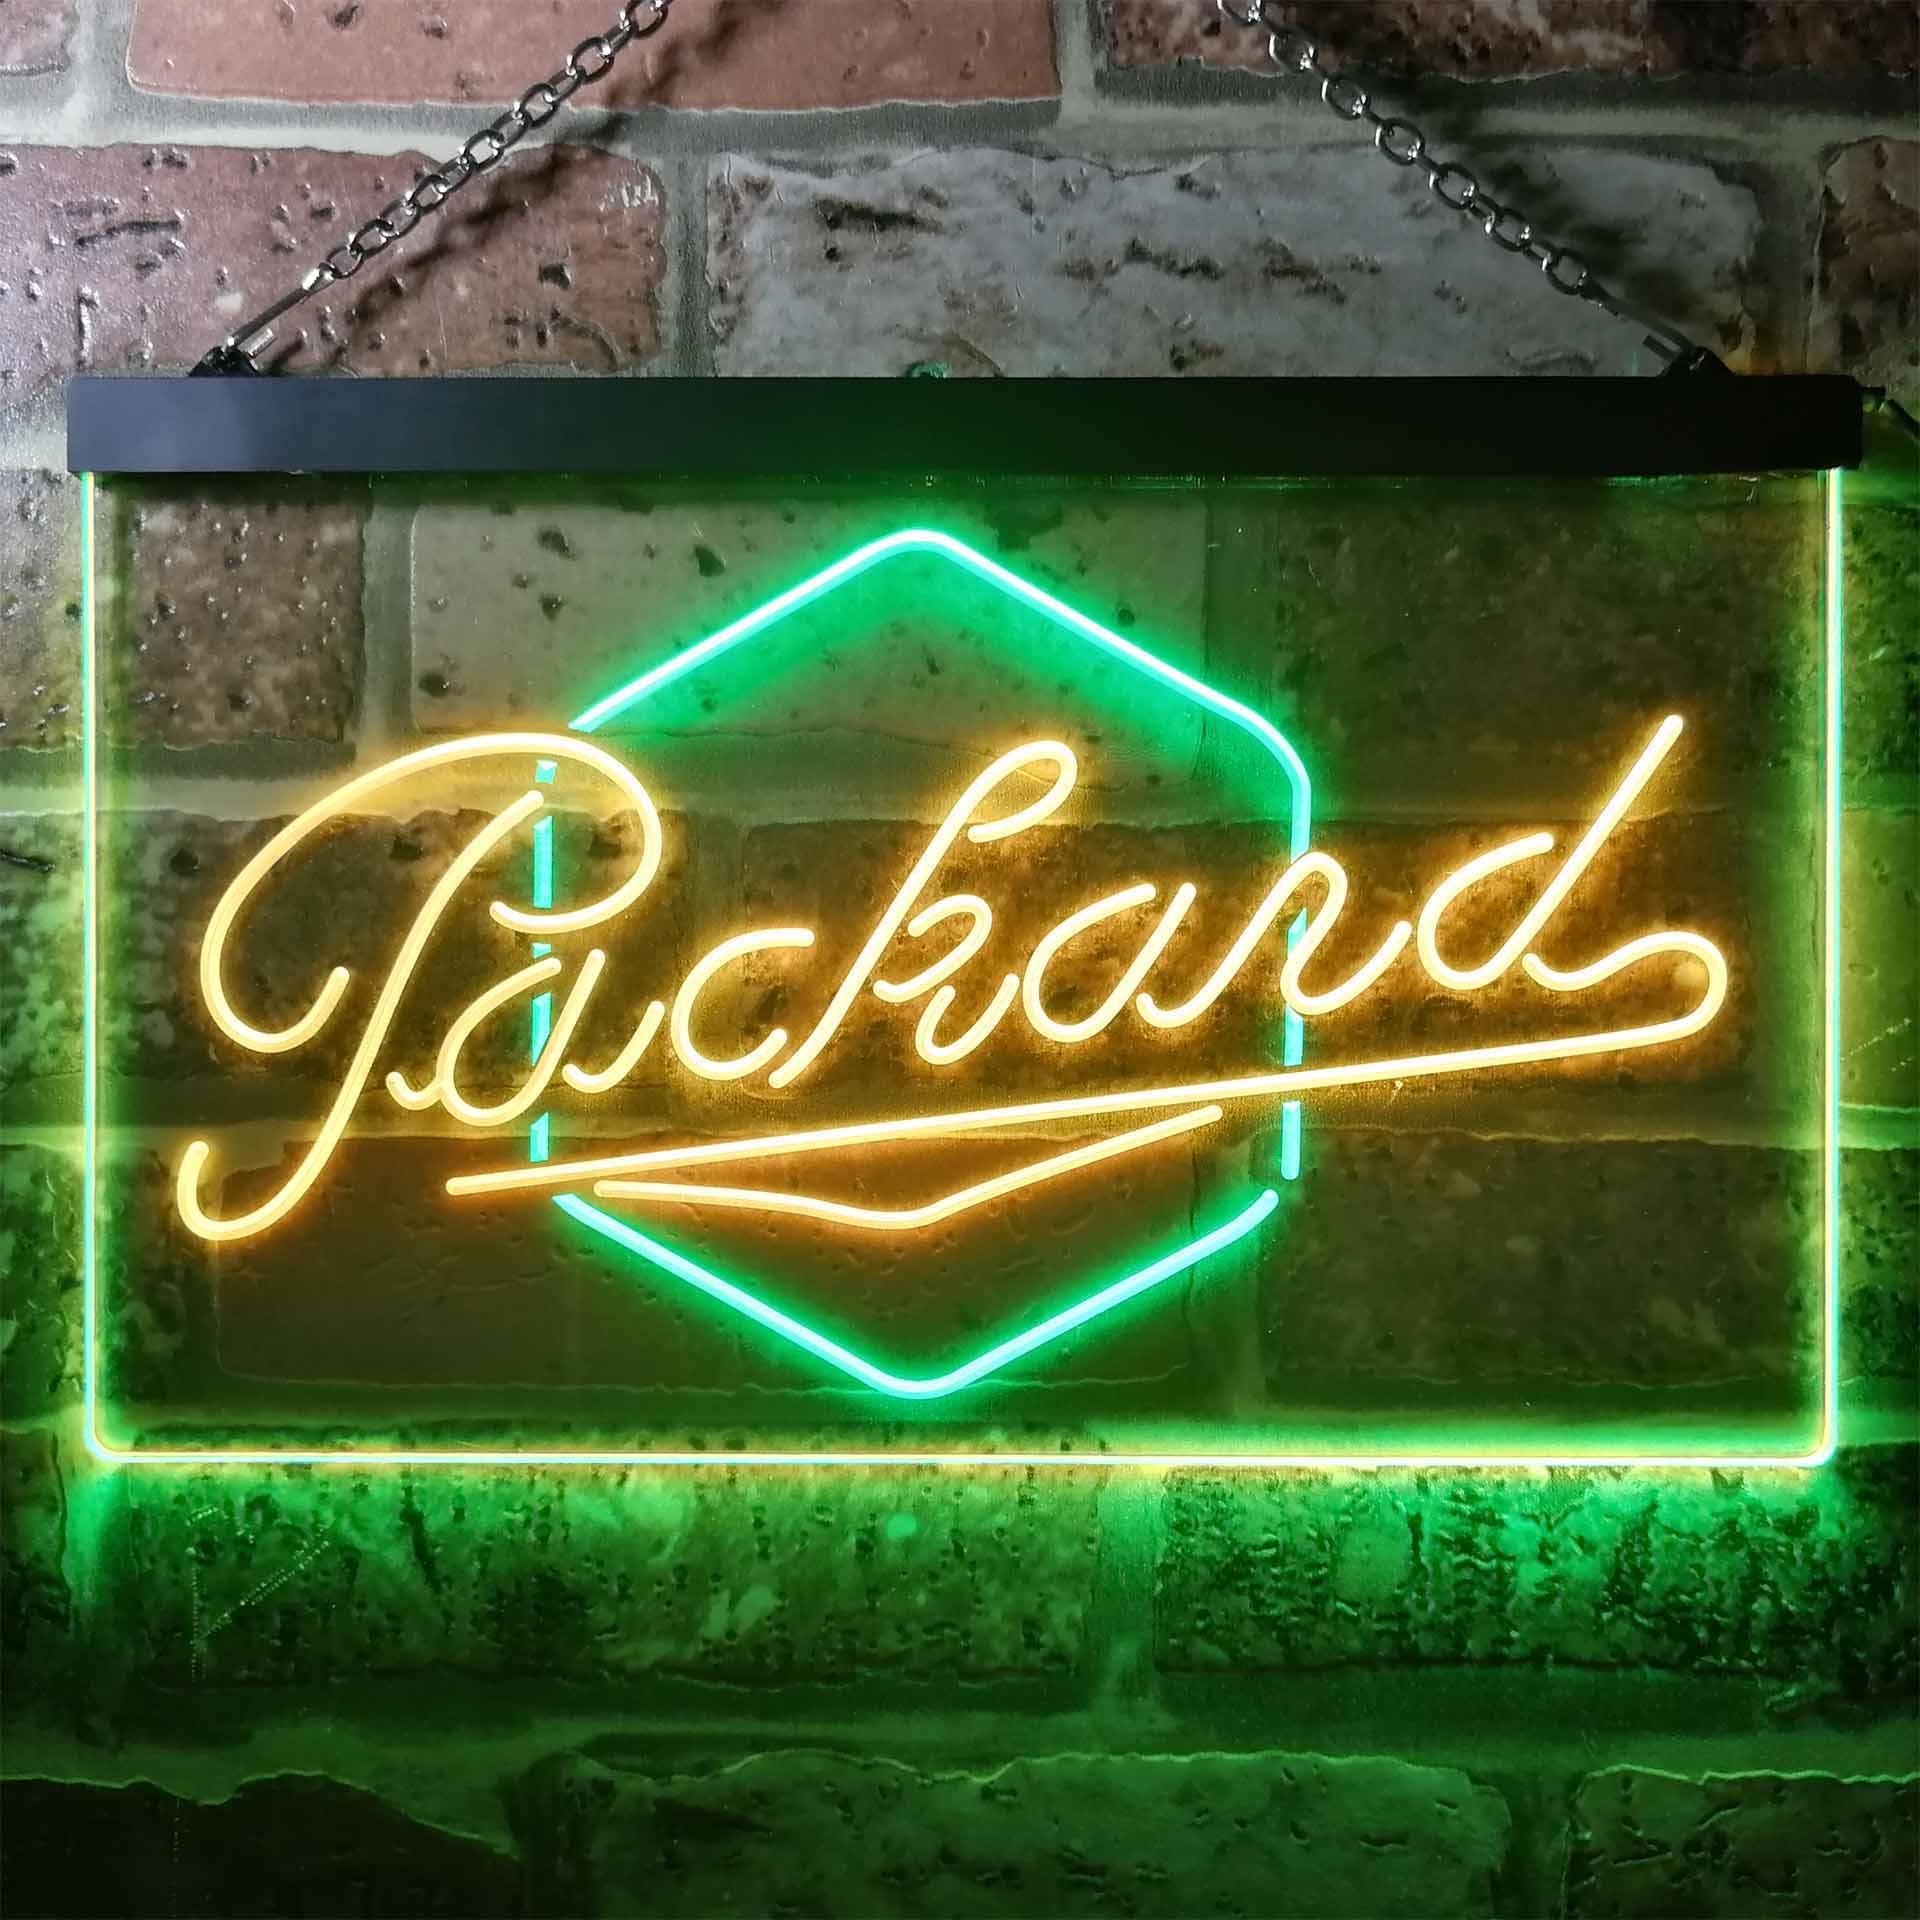 Packard Auto Neon LED Sign